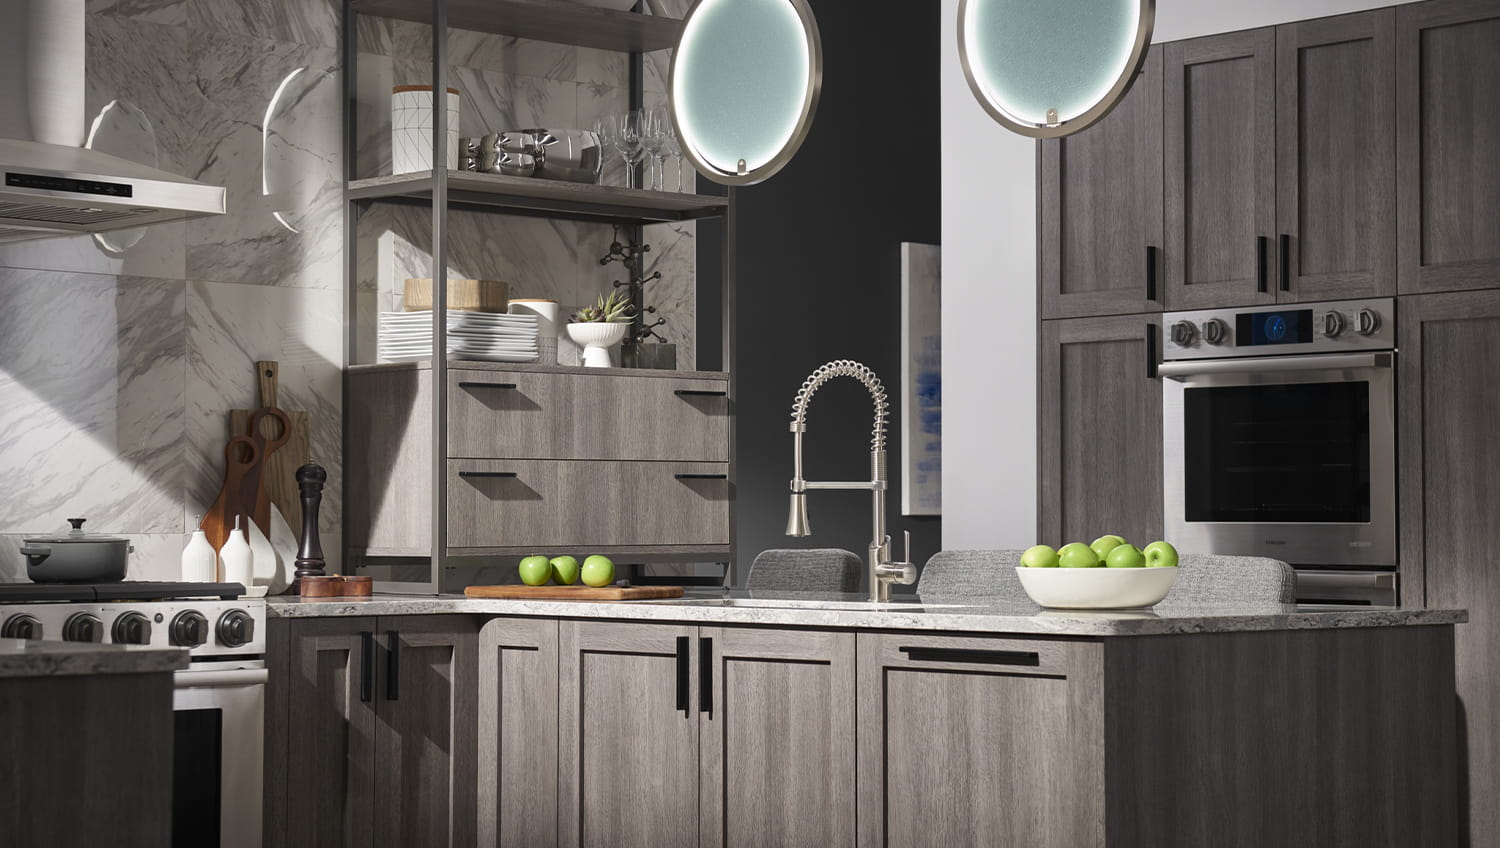 Fresno Modern Kitchen Faucet Collection from DXV